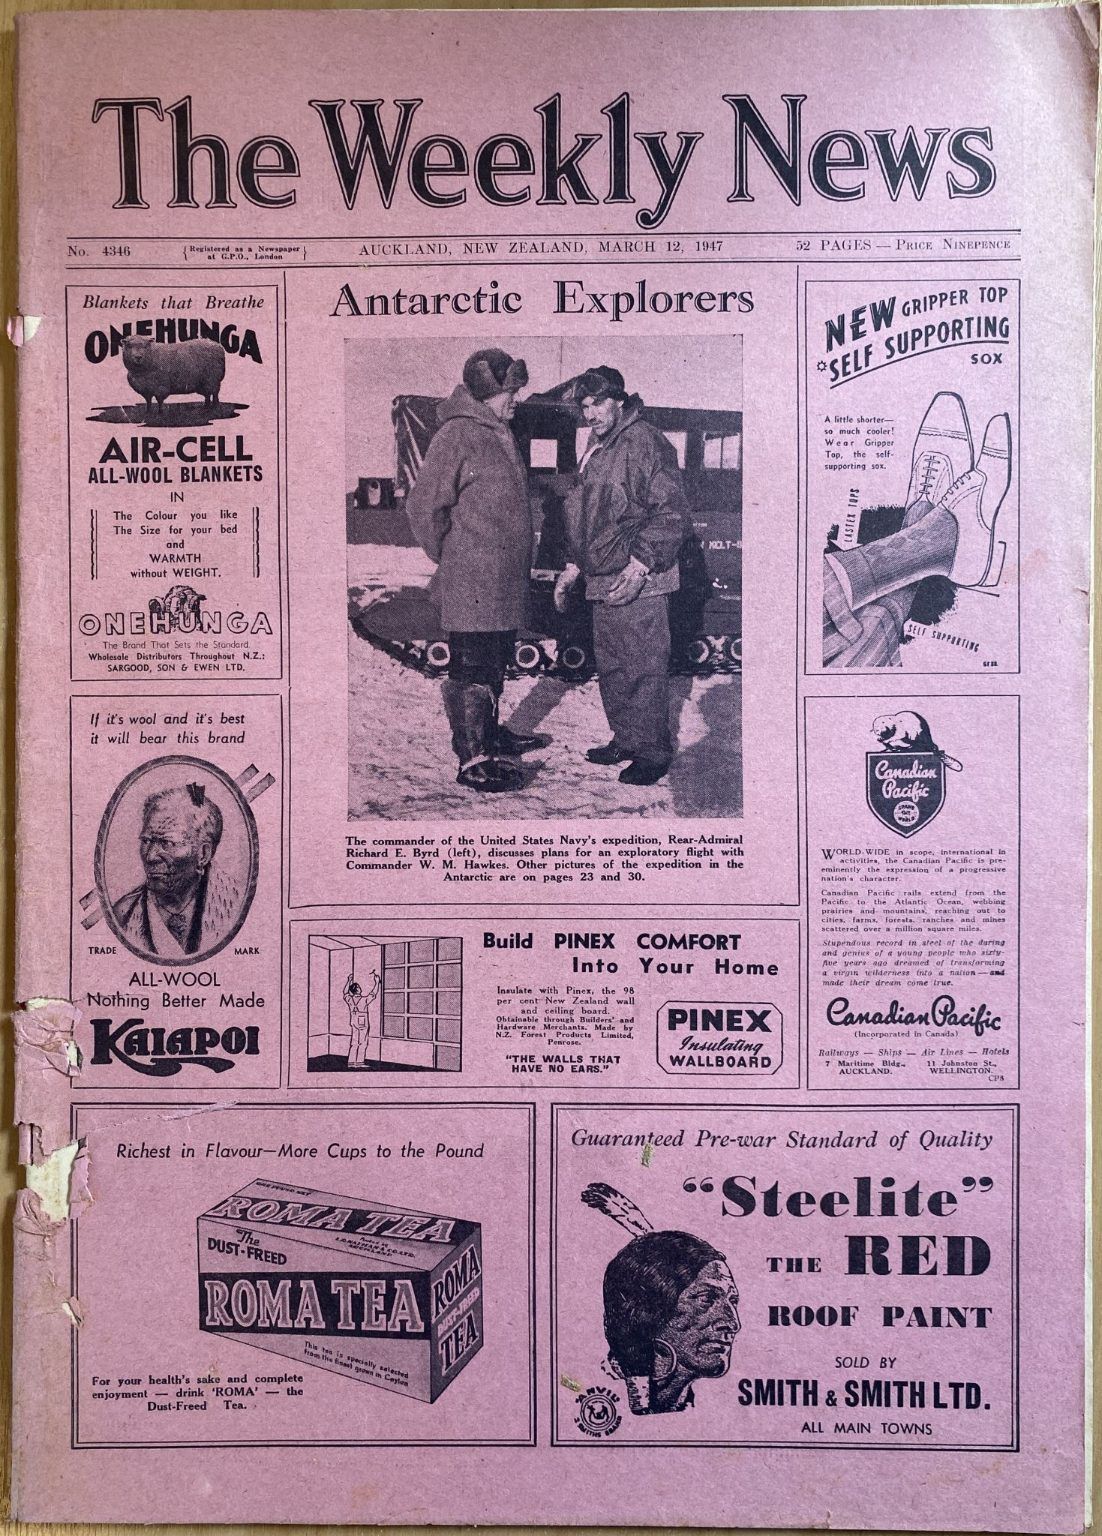 OLD NEWSPAPER: The Weekly News, No. 4346, 12 March 1947